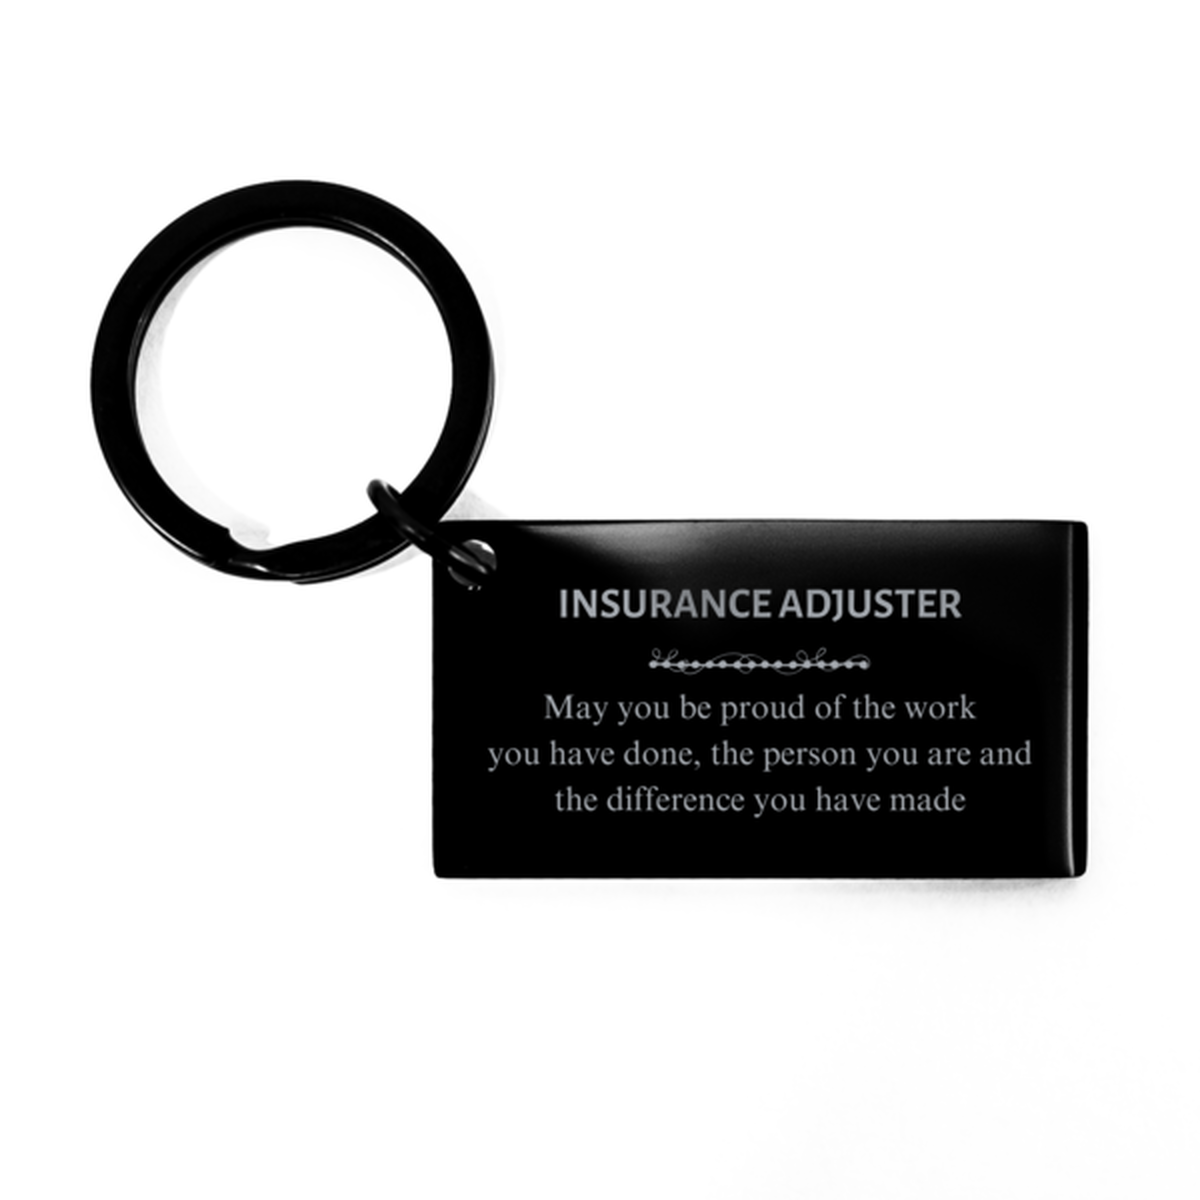 Minister May you be proud of the work you have done, Retirement Insurance Adjuster Keychain for Colleague Appreciation Gifts Amazing for Insurance Adjuster